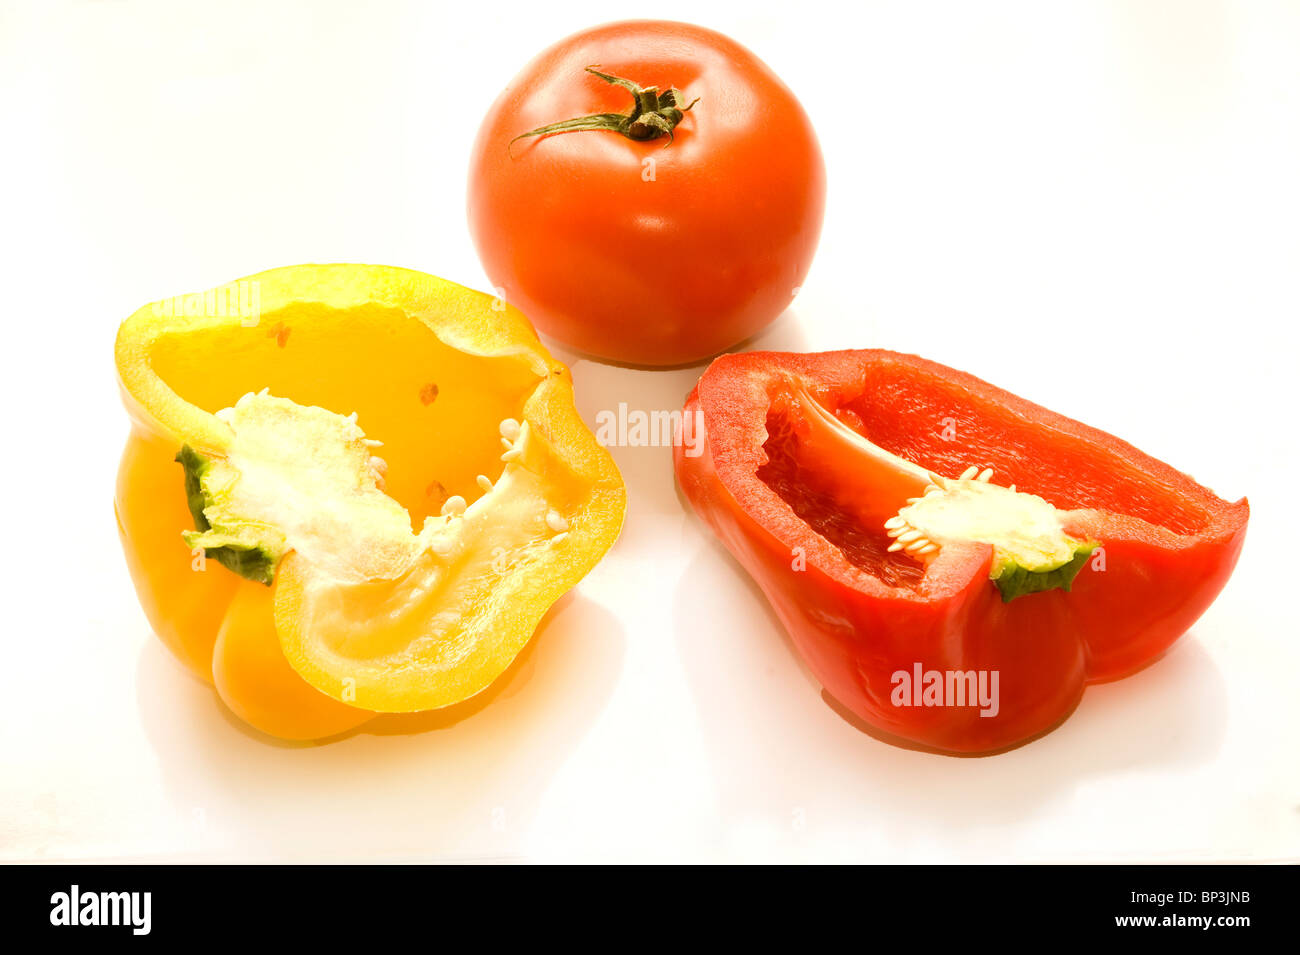 Longitudinal section of yellow and red Bell pepper and a whole tomato set on a white background Stock Photo